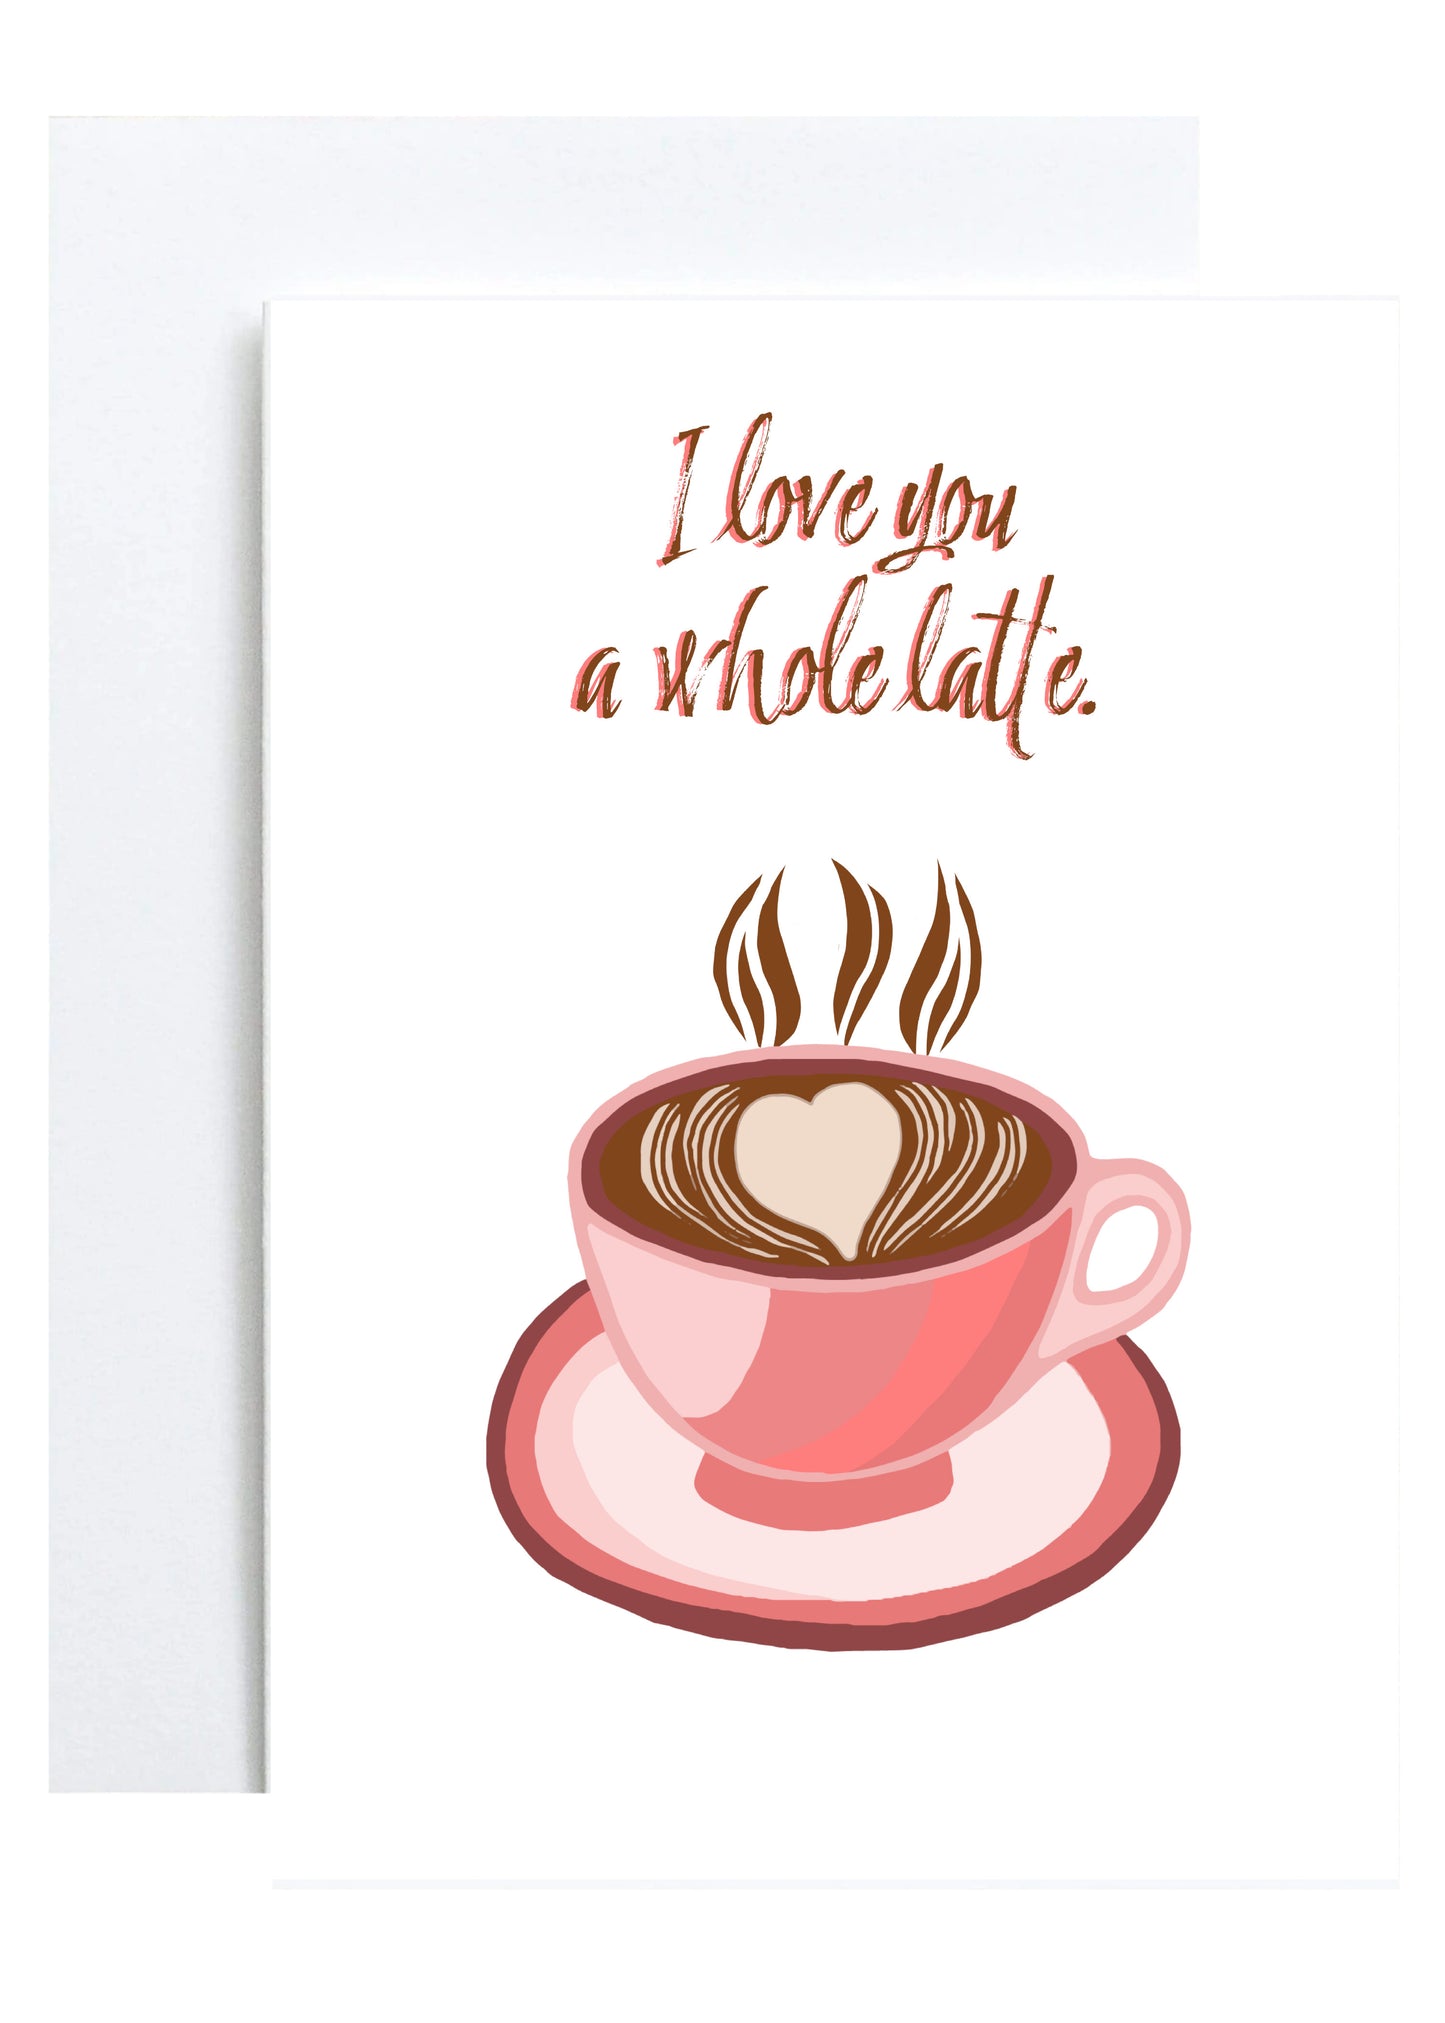 "I Love You a Whole Latte" Greeting Card (Love, Friendship, Anniversary)